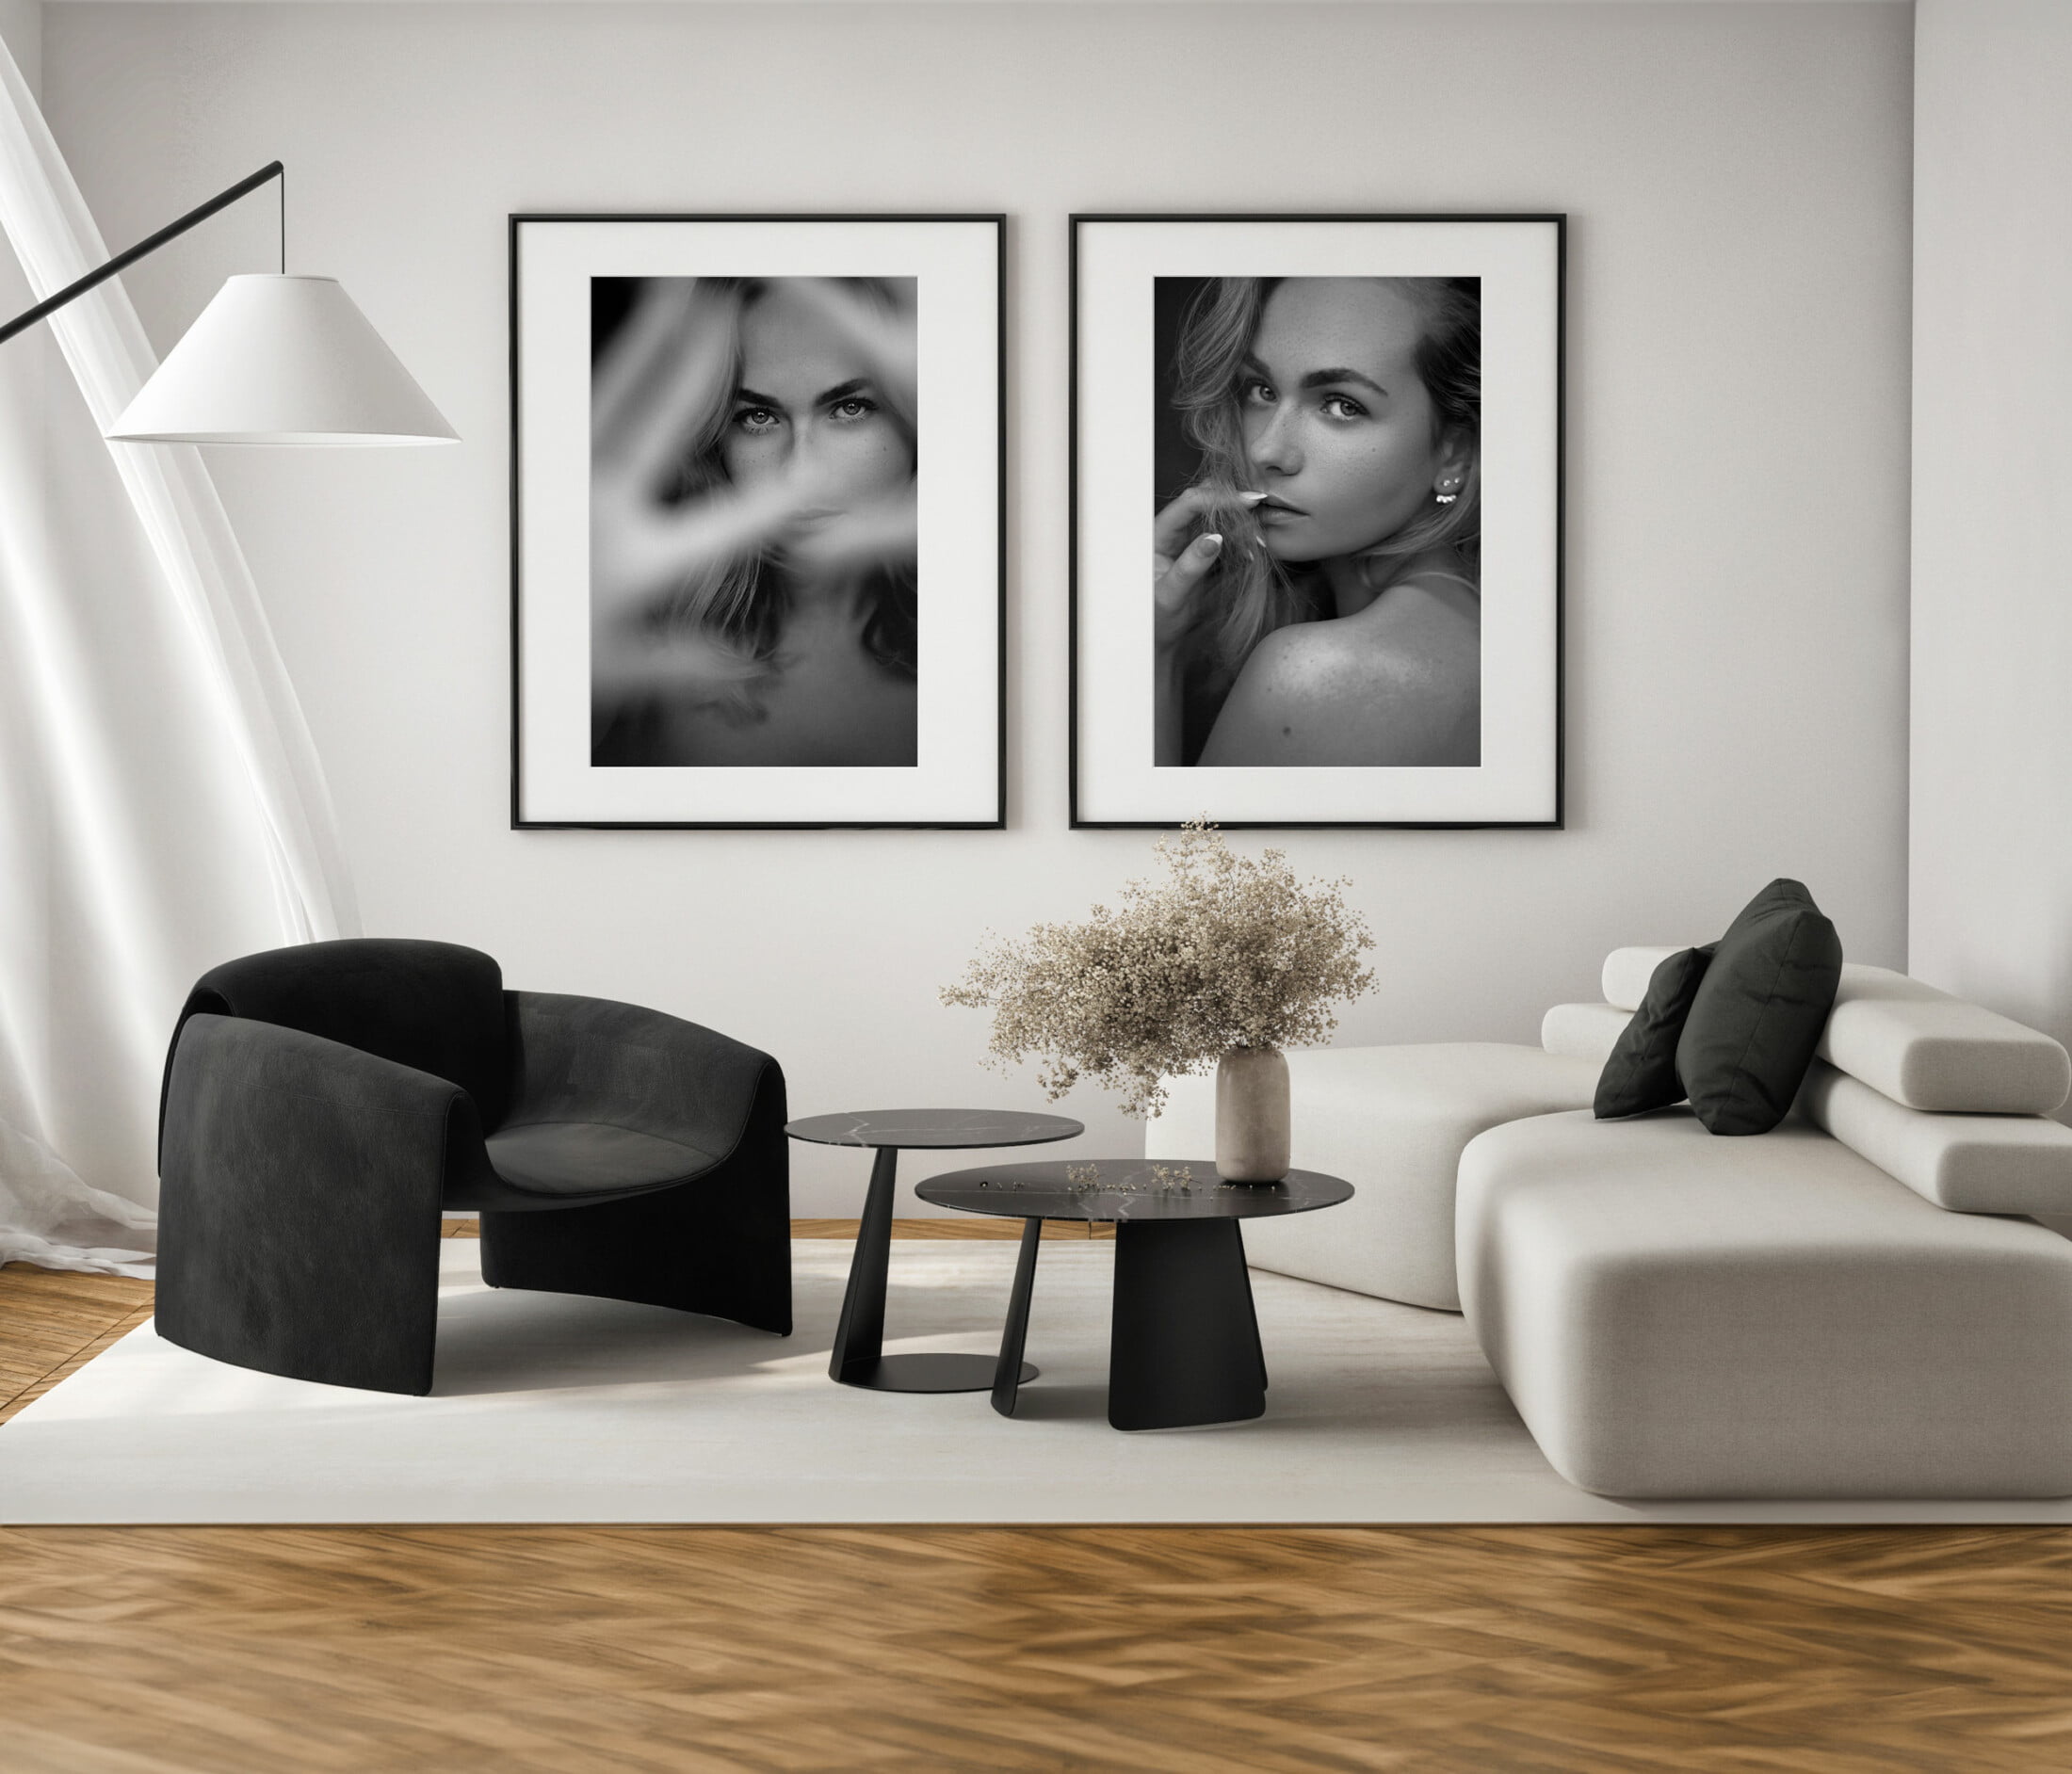 Treat yourself with art piece for your interior